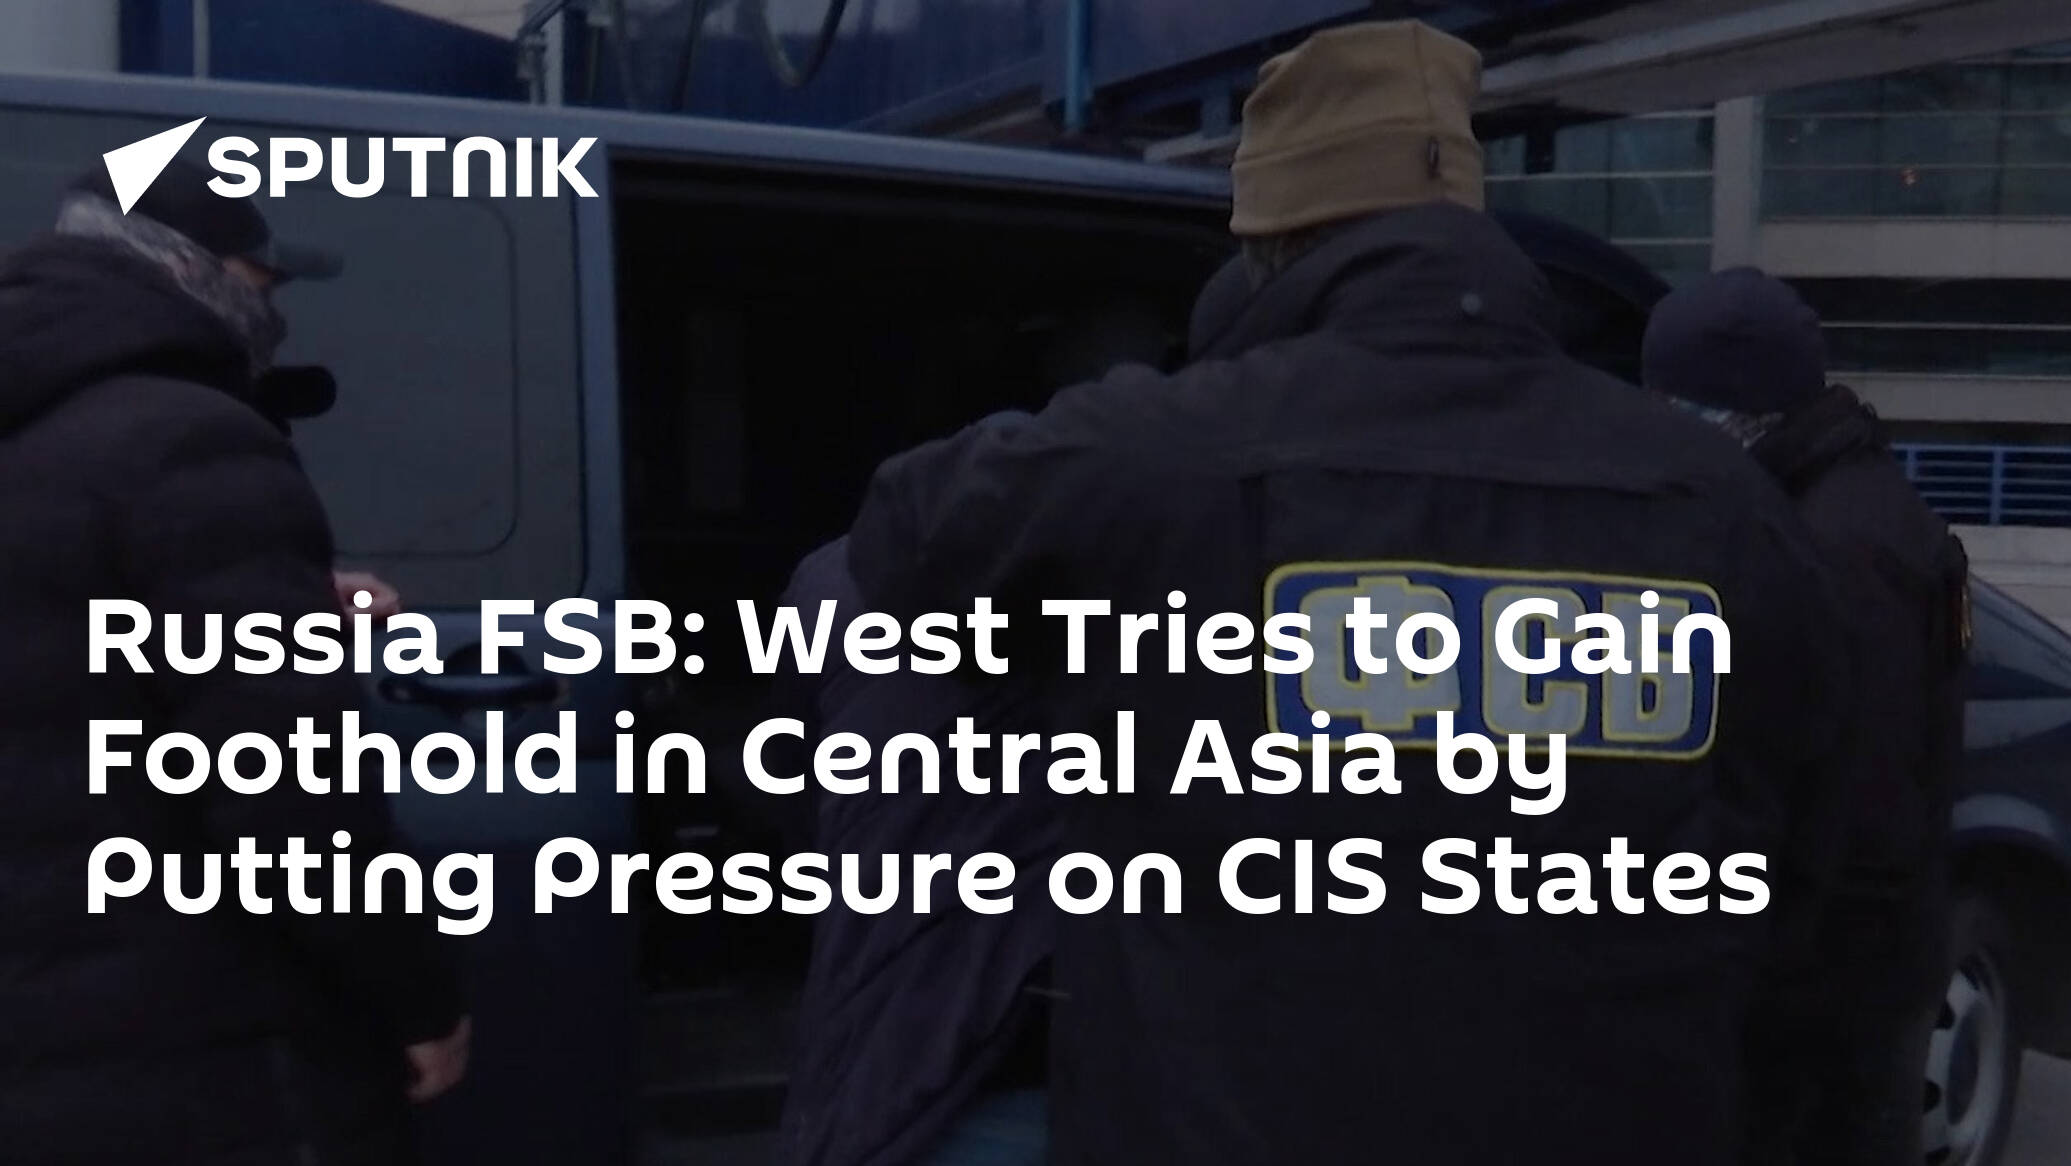 Russia FSB West Tries to Gain Foothold in Central Asia